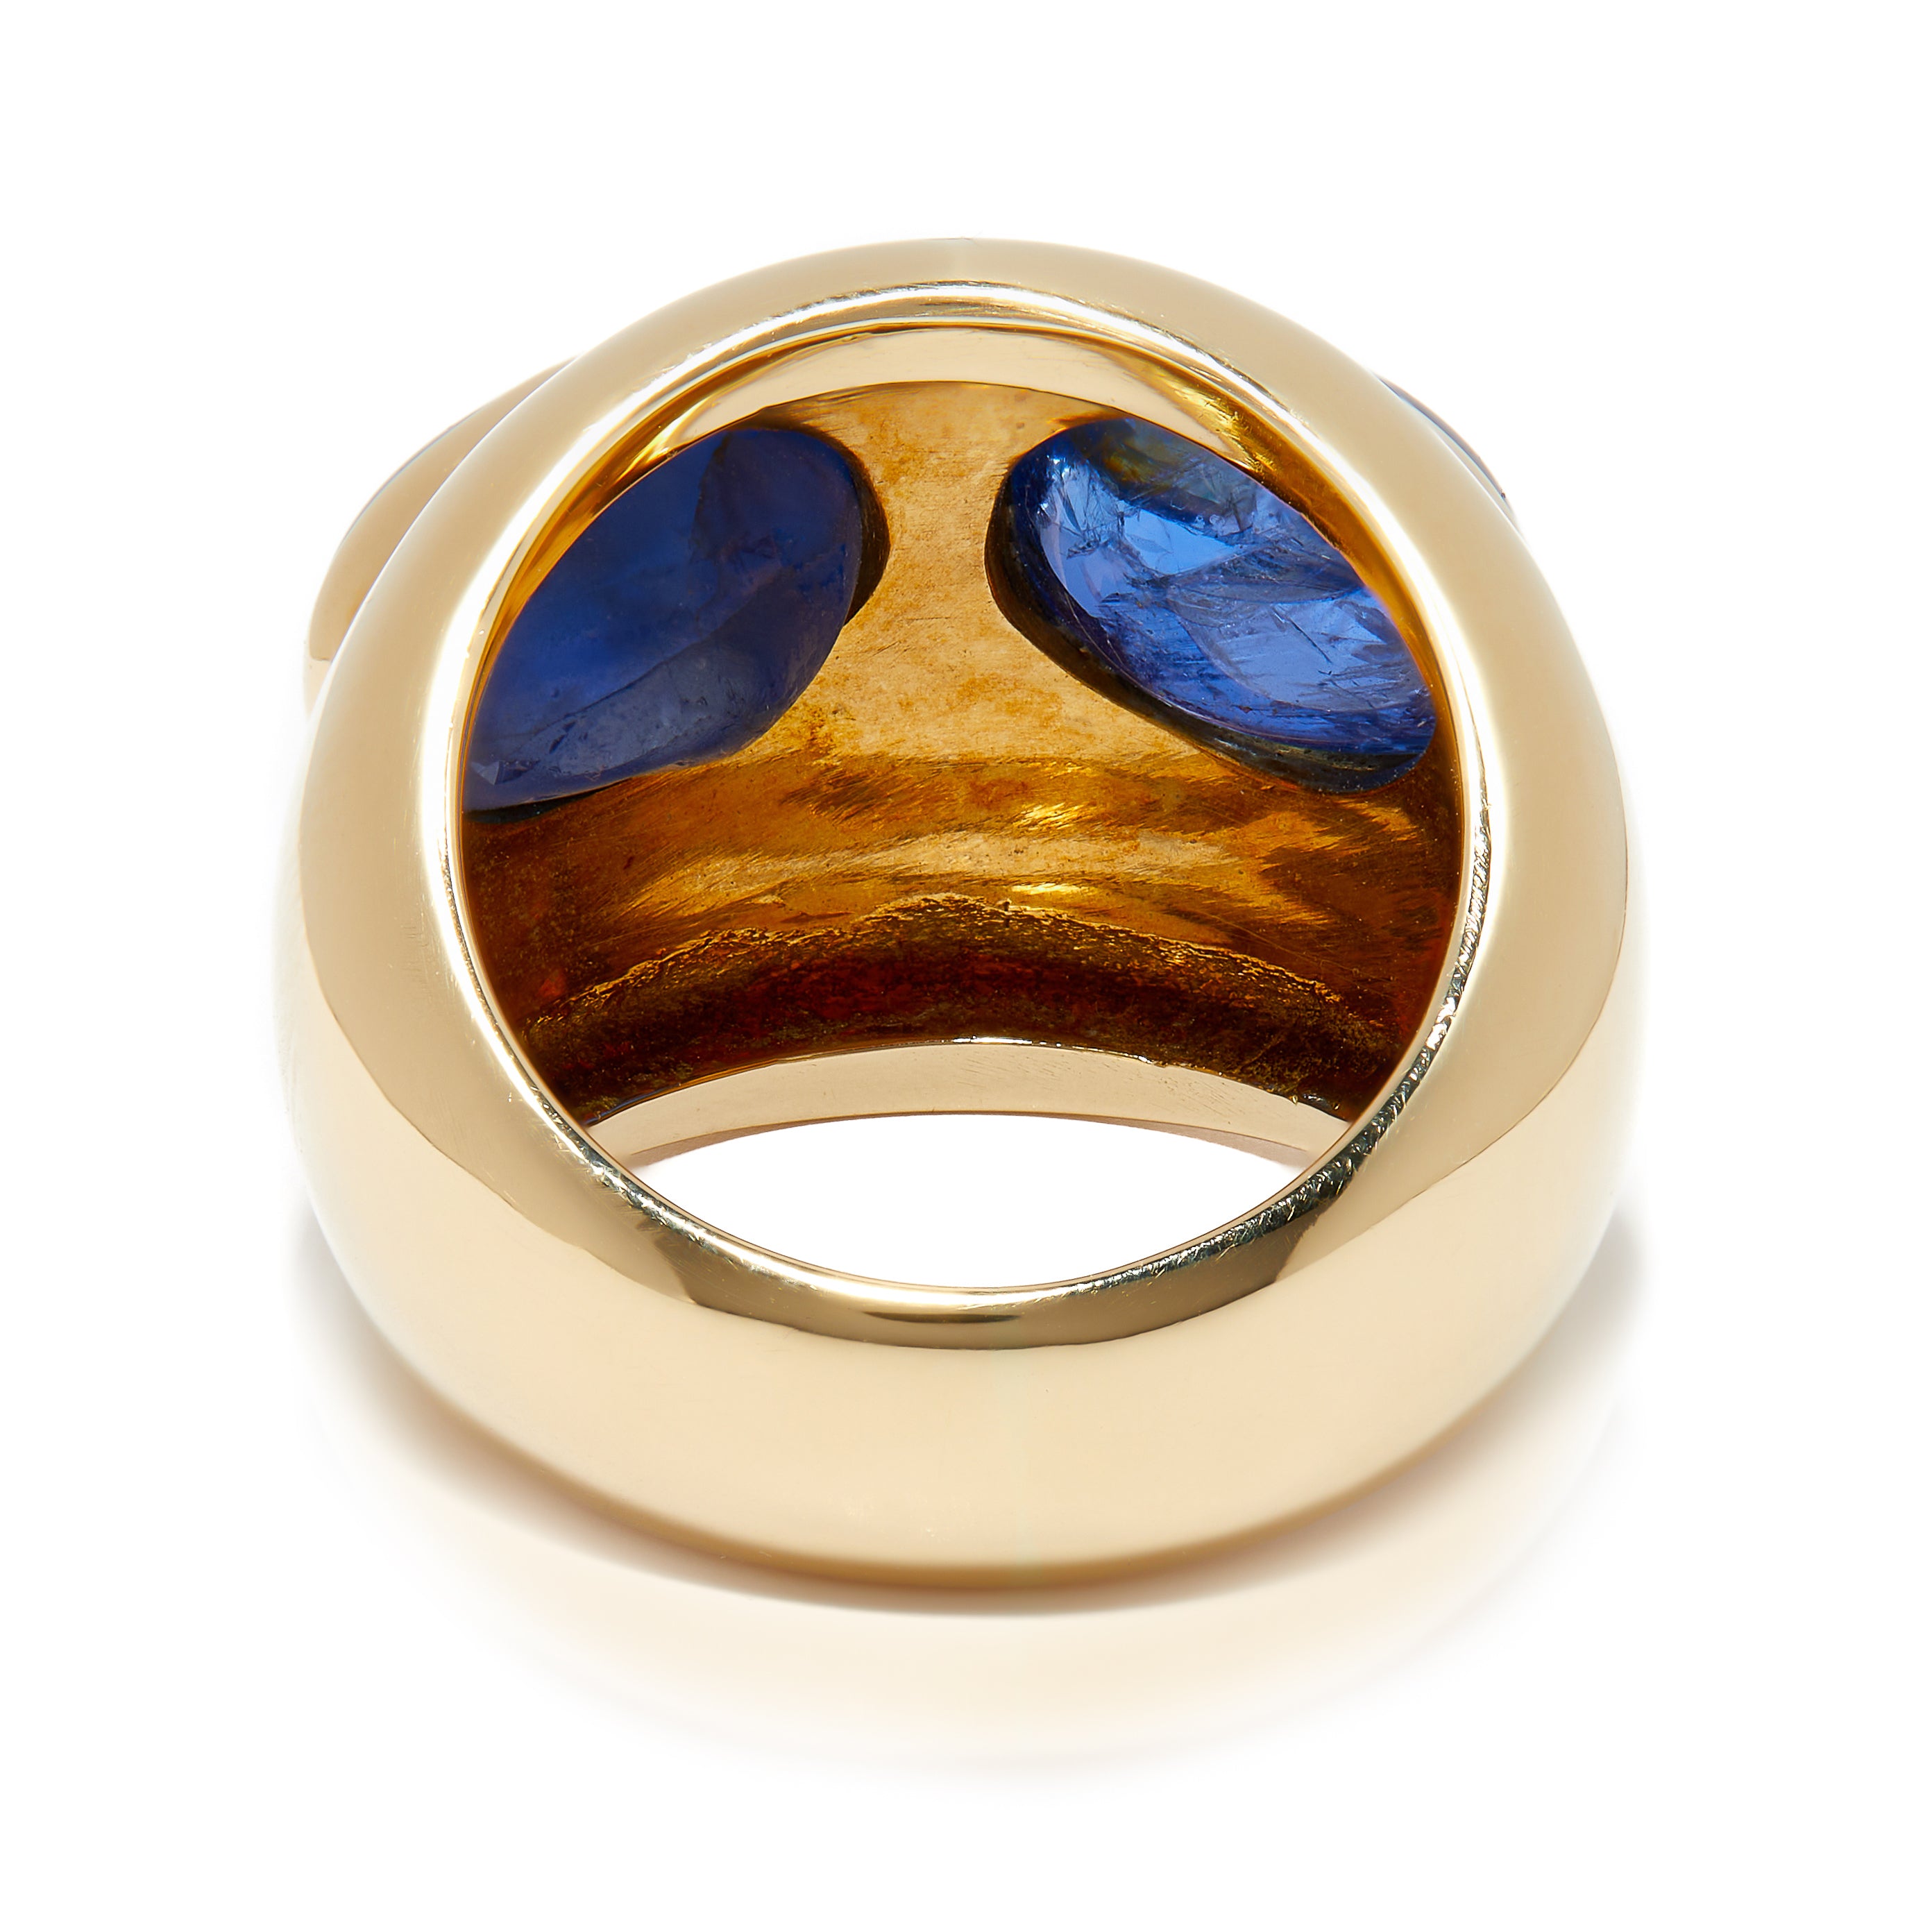 Back view of 1980s-1990s gold sapphire ring.